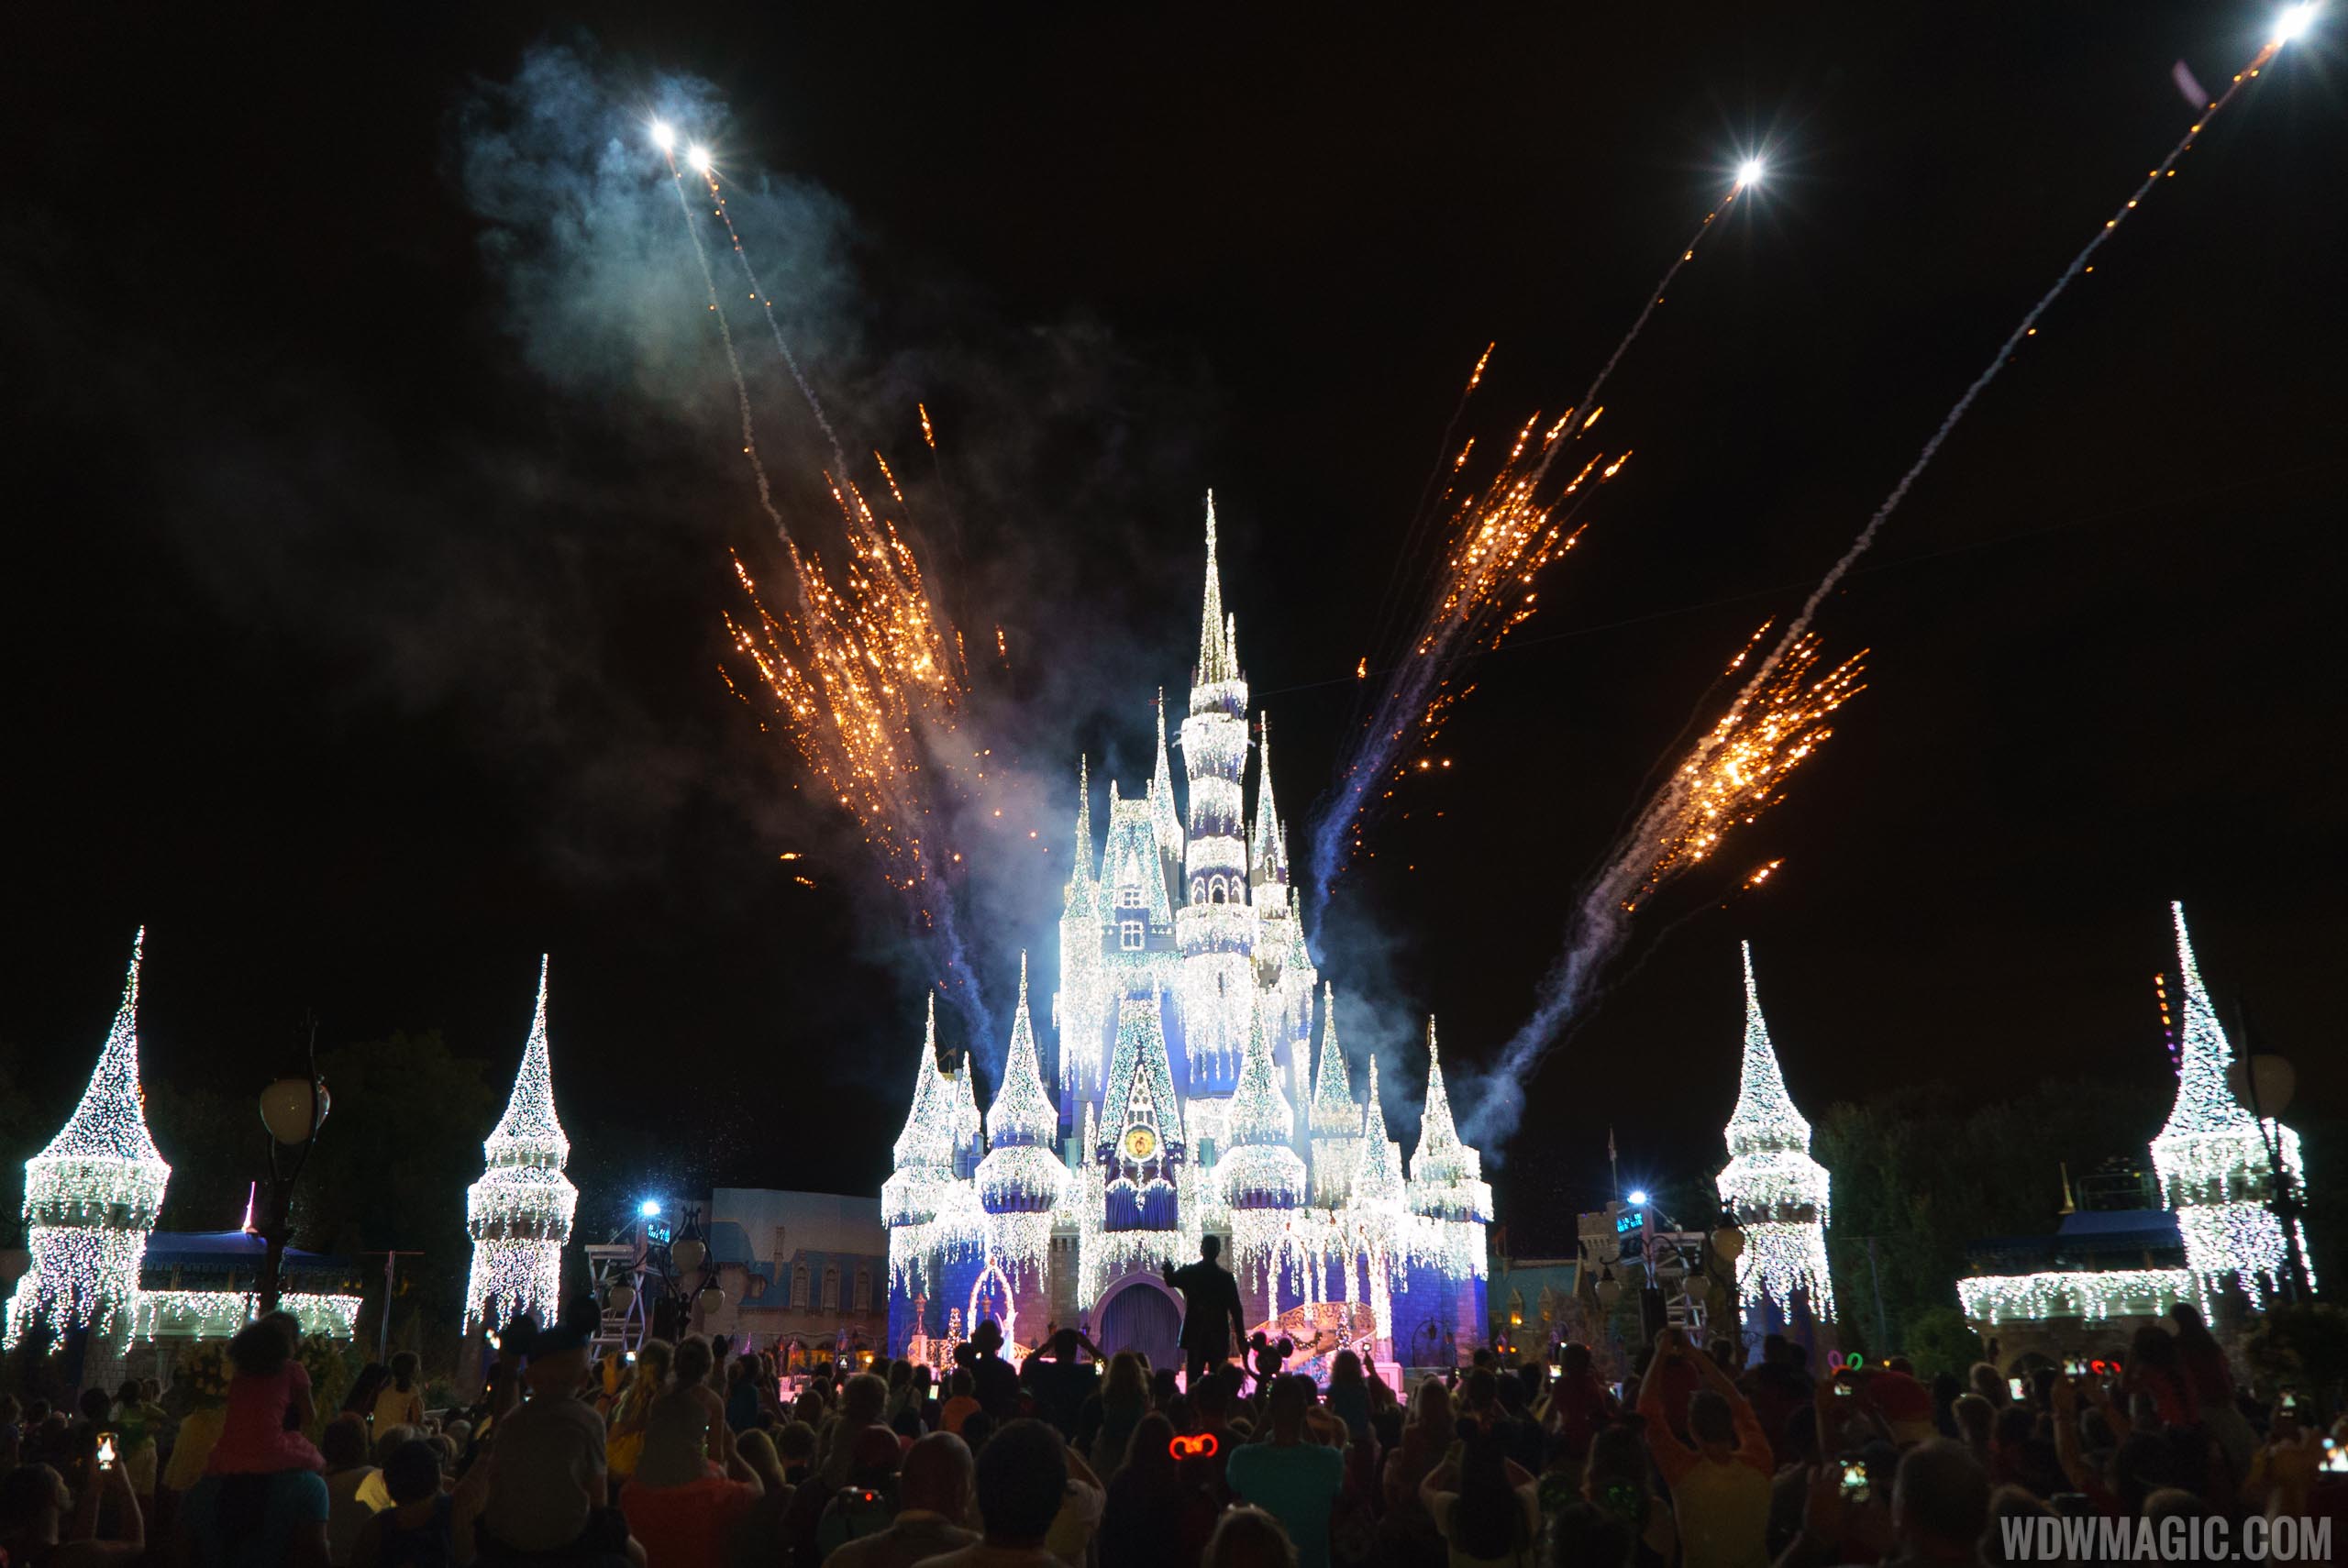 PHOTOS - A look at the newly extended Cinderella Castle dreamlights at ...